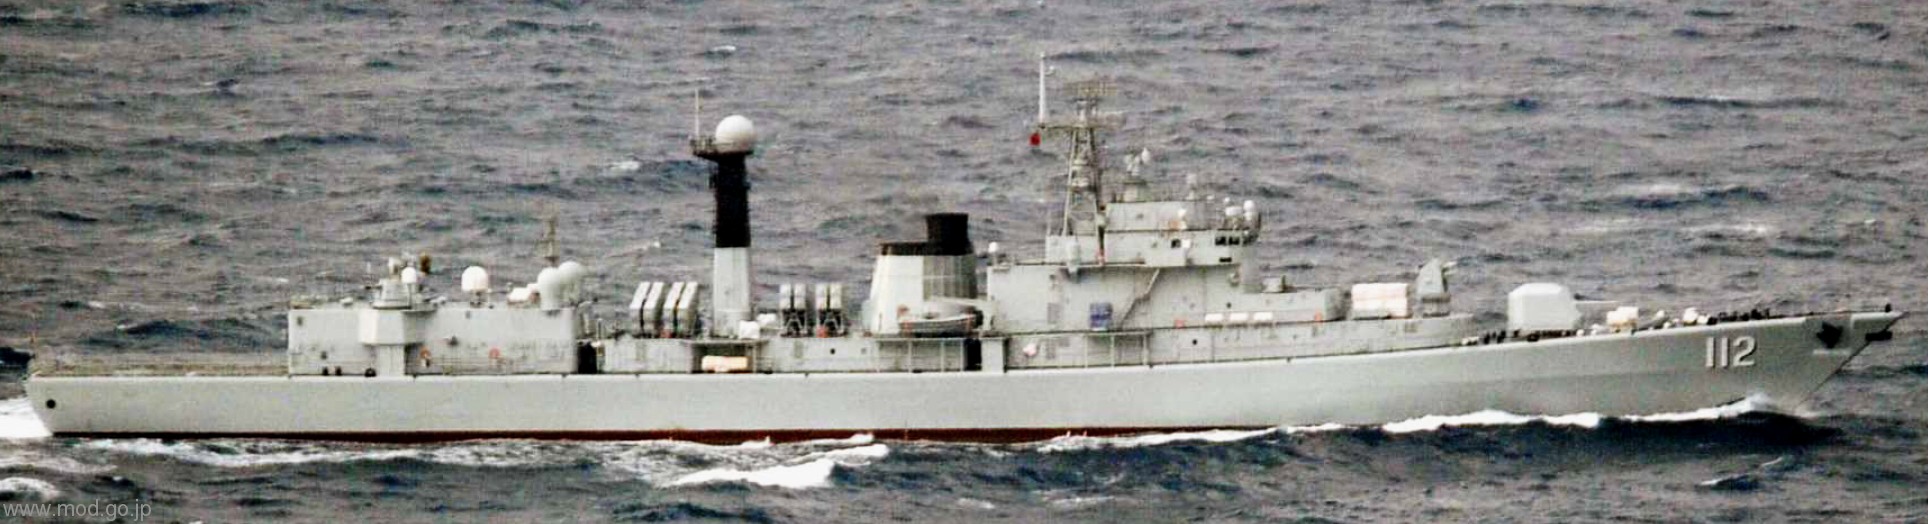 ddg-112 plans harbin type 052 luhu class guided missile destroyer china peoples liberation army navy plan 06